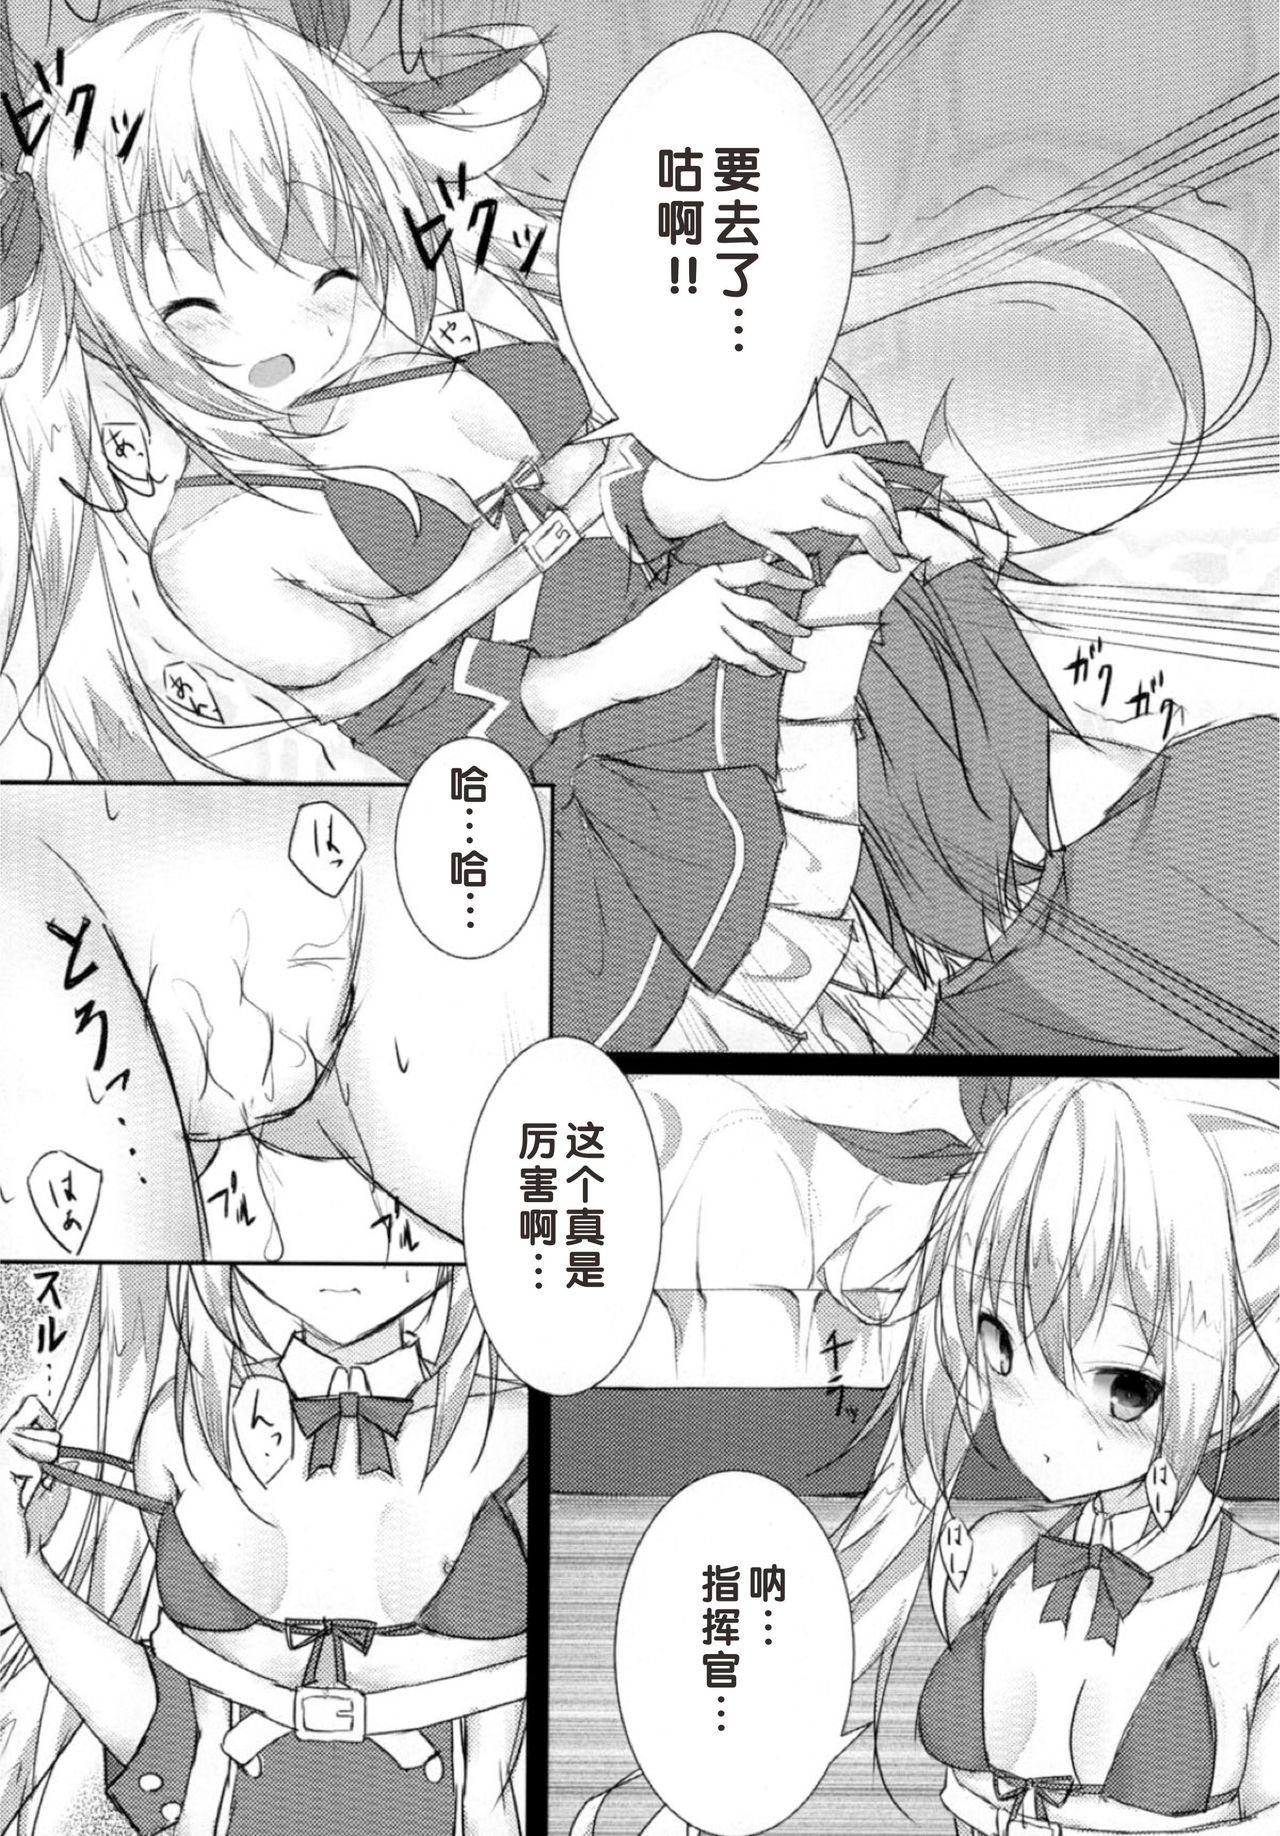 18 Year Old Porn Tsunderempire - Azur lane Lovers - Page 8